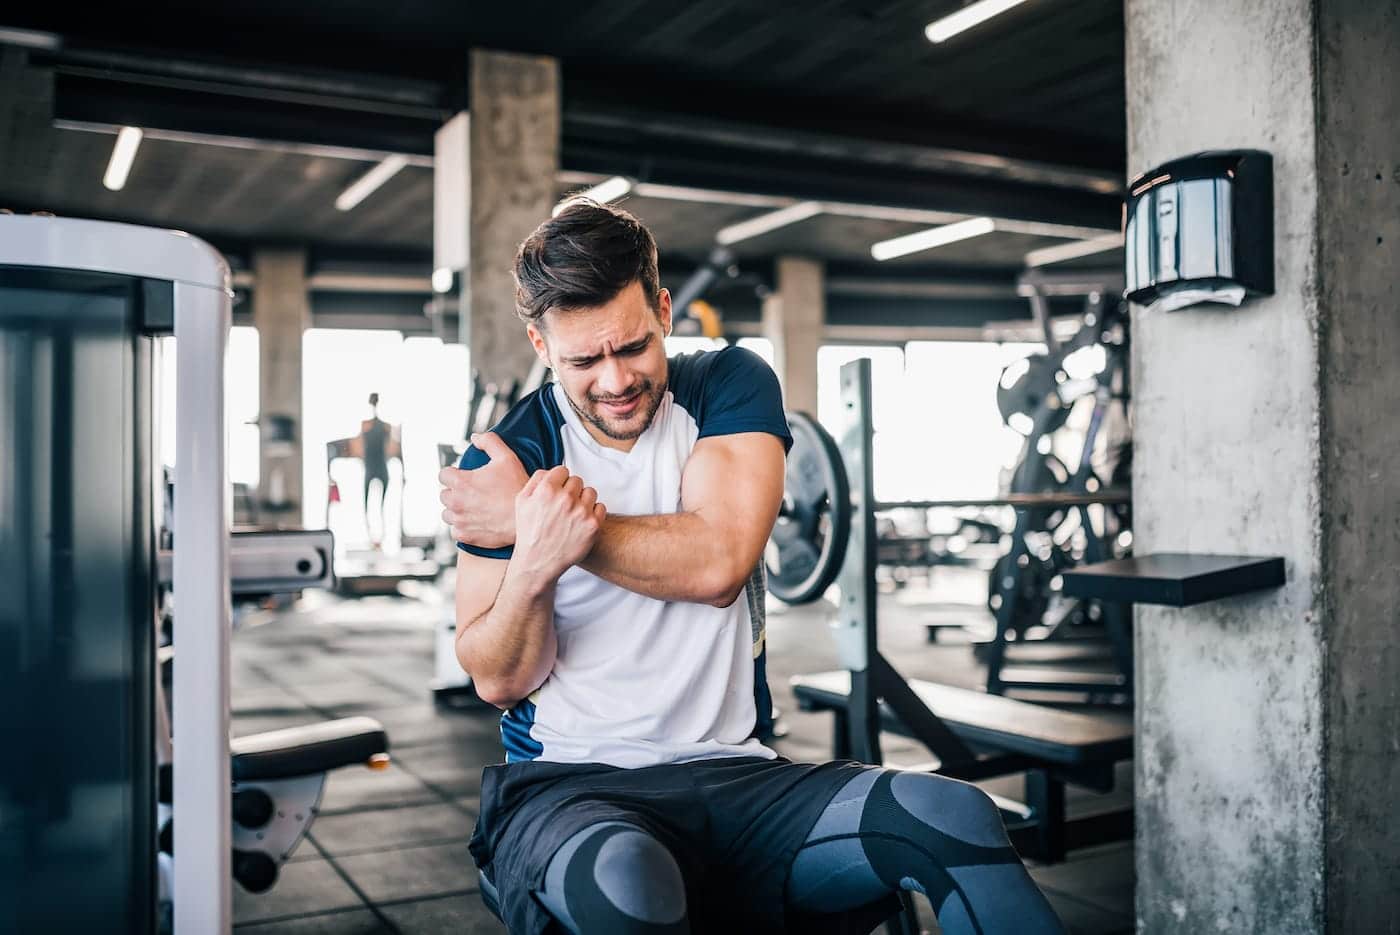 Can cbd help with your gym recovery?